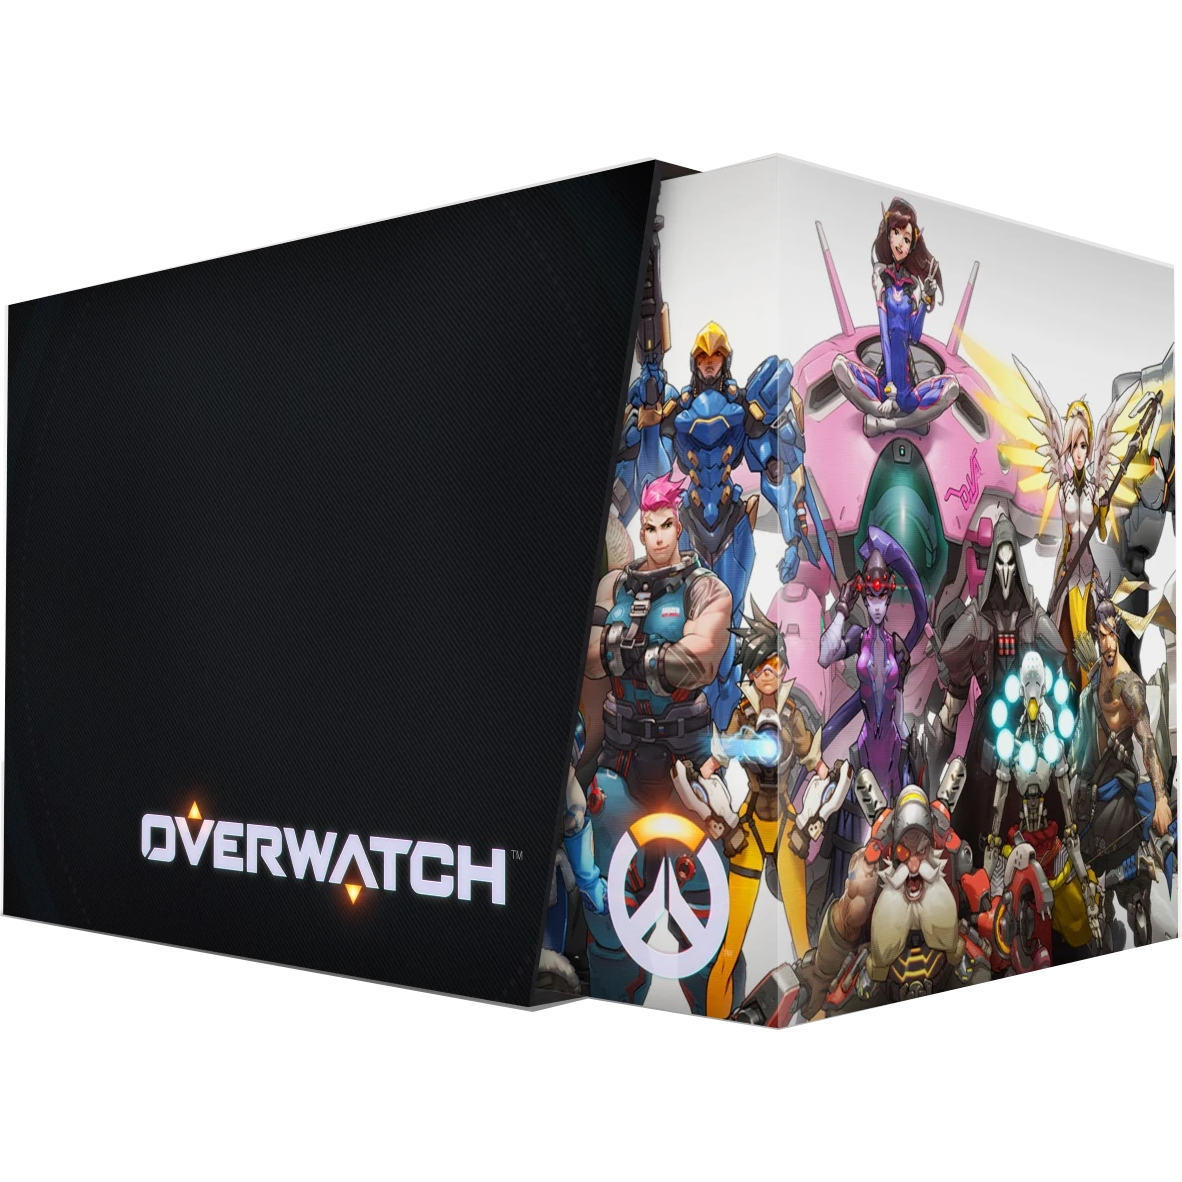 PS4 - Overwatch Collector's Edition (Sealed)